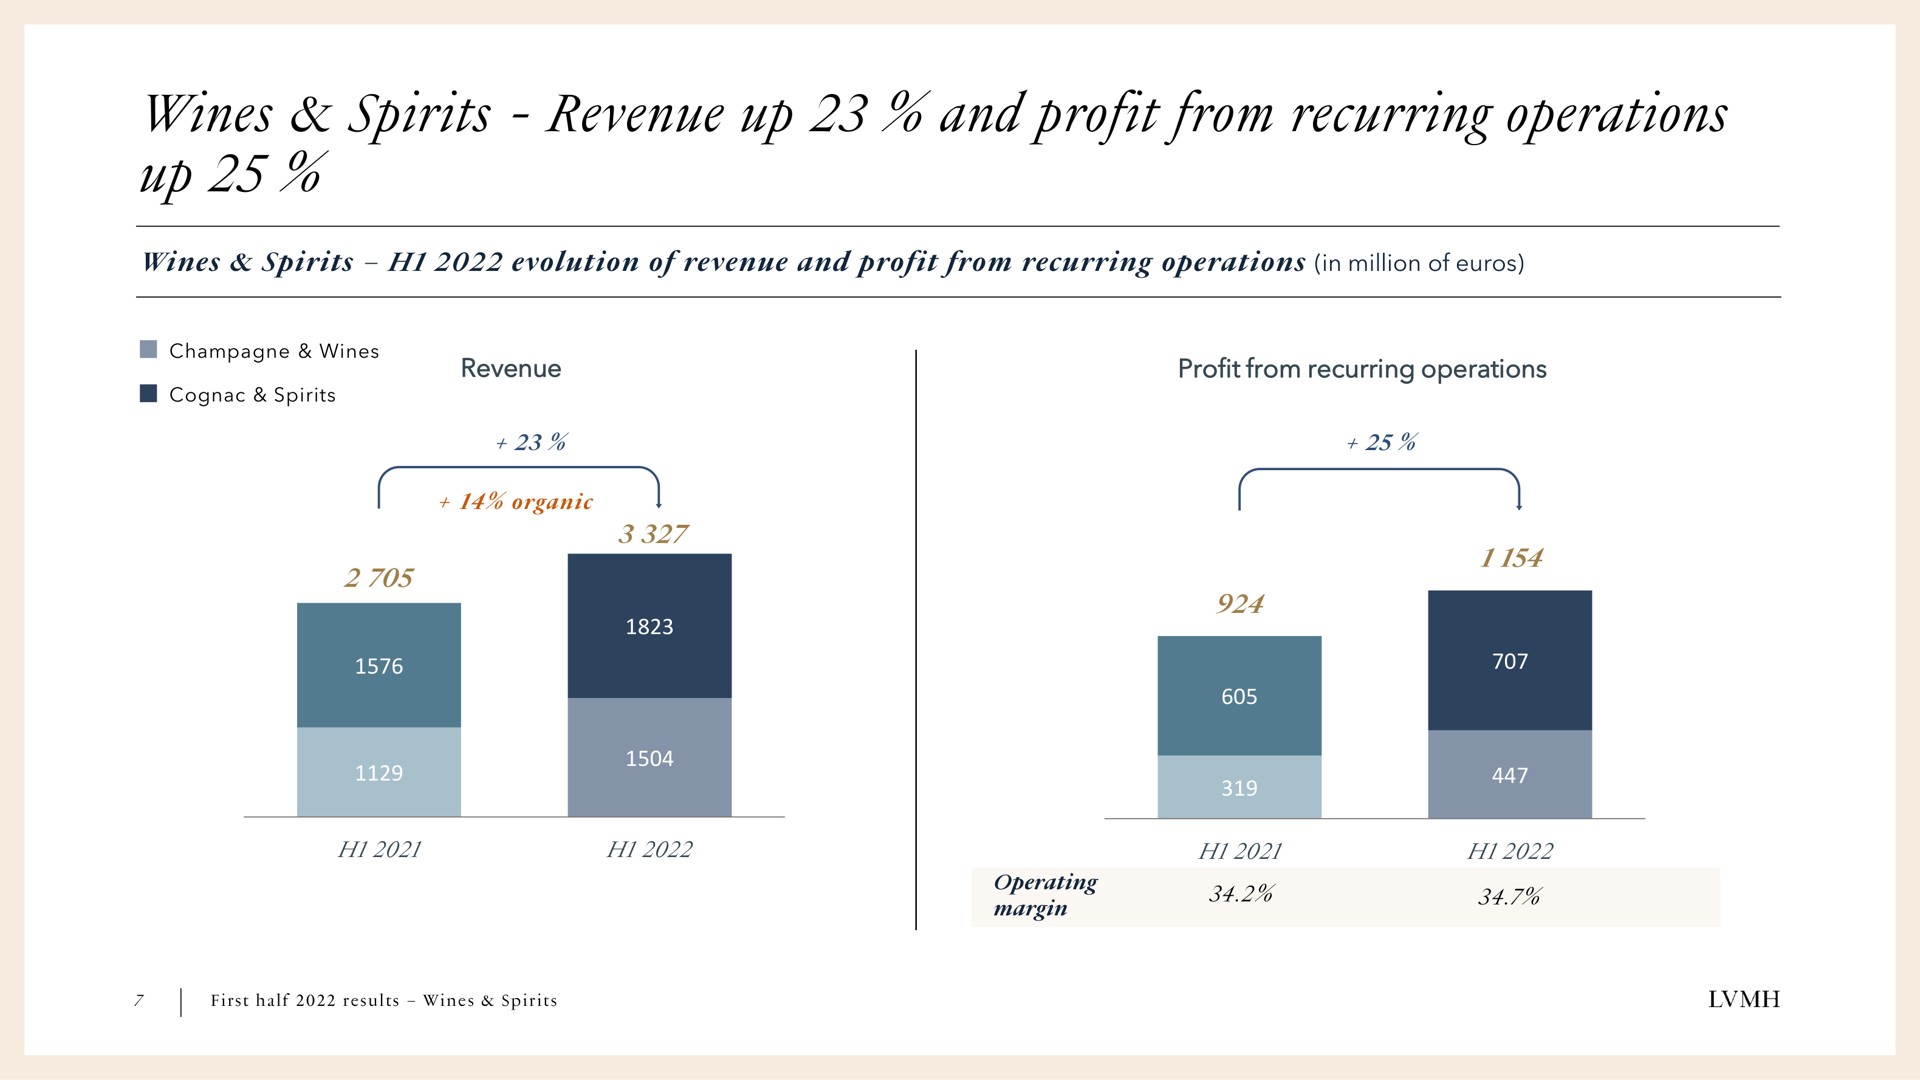 wines spirits revenue up and profit from recurring operations up | LVMH